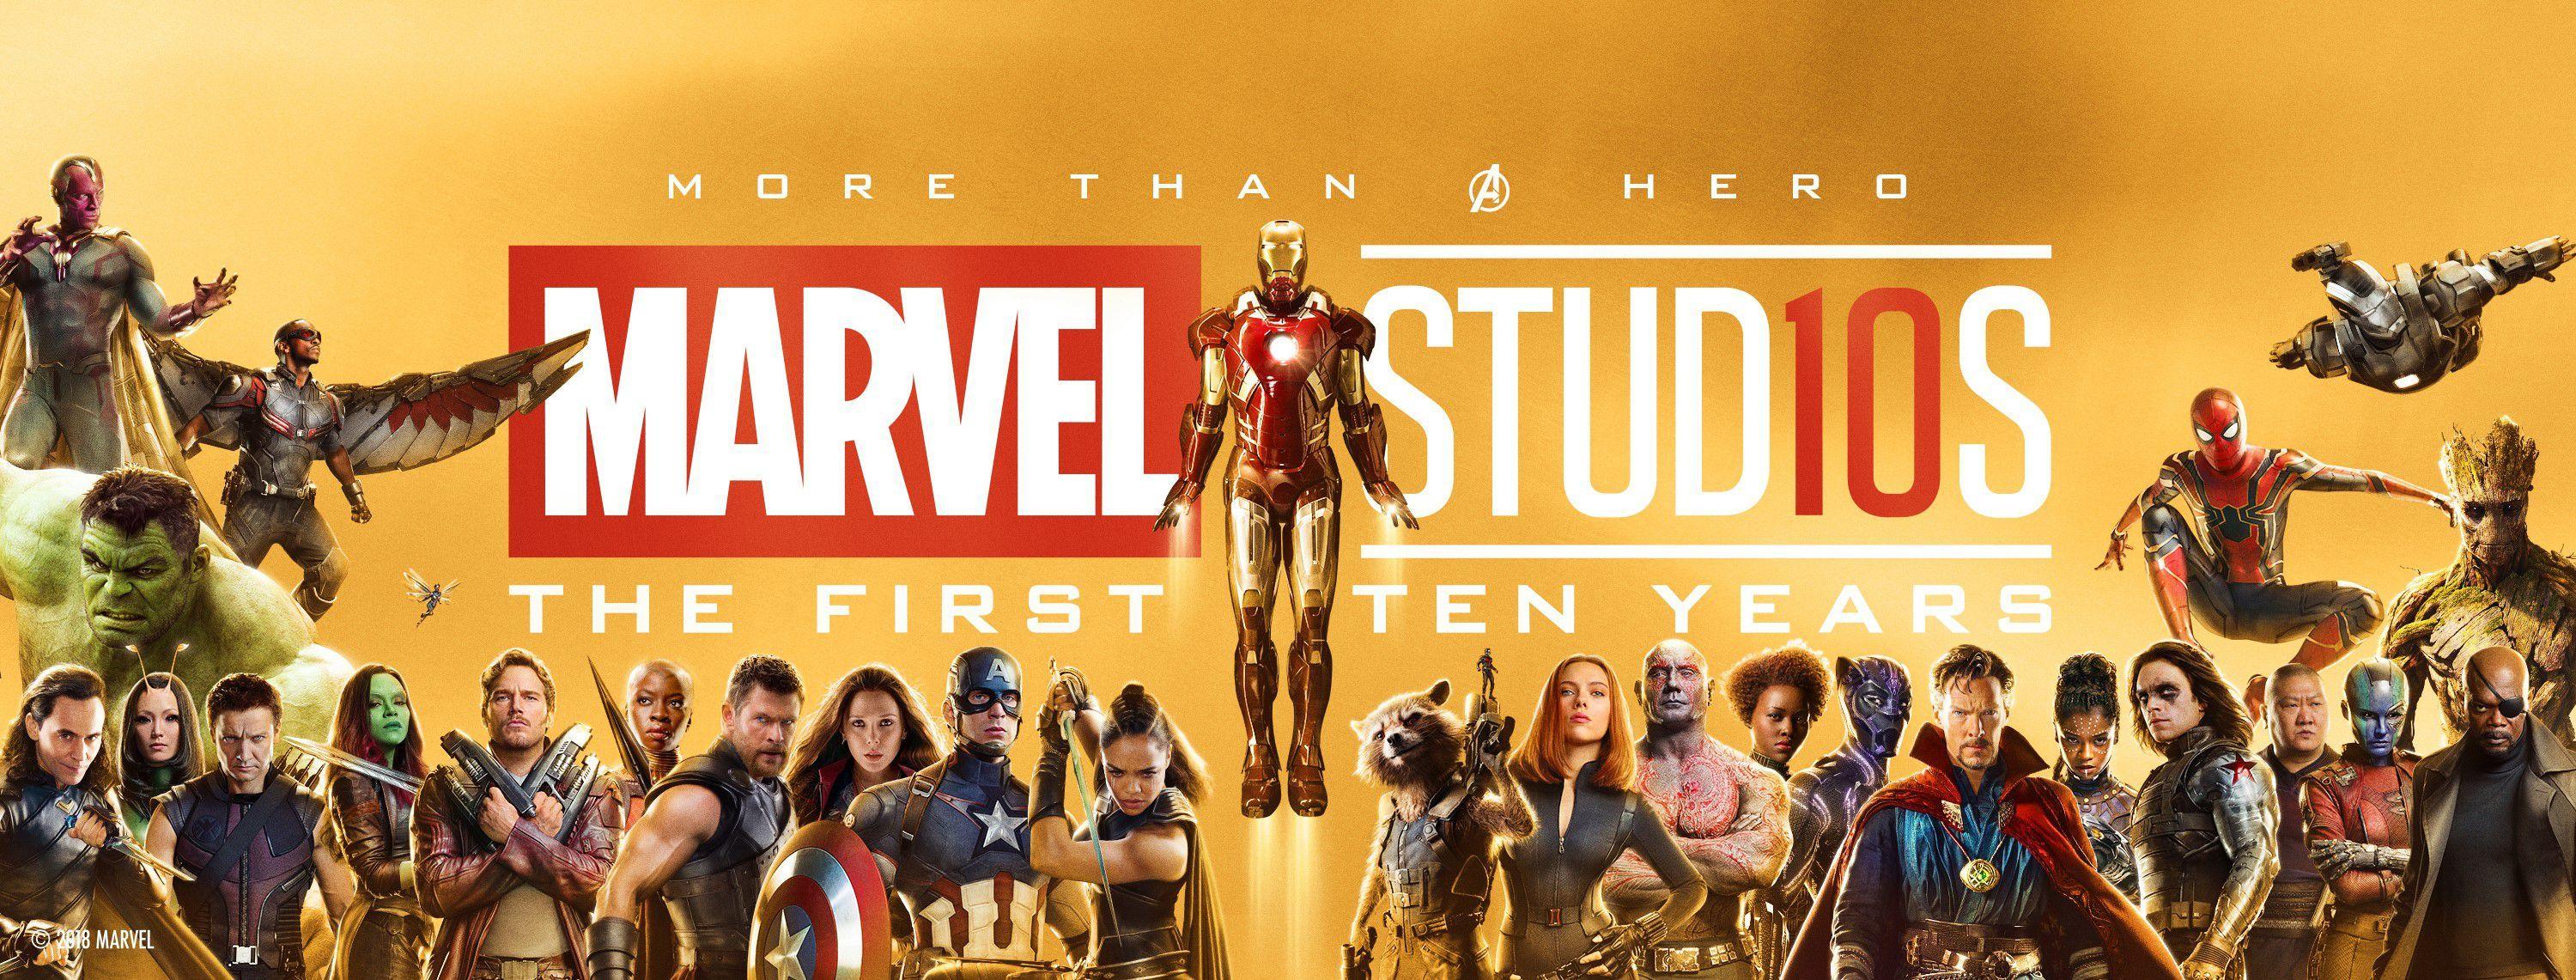 Marvel Studios The First Ten Years collection coming to Hasbro's